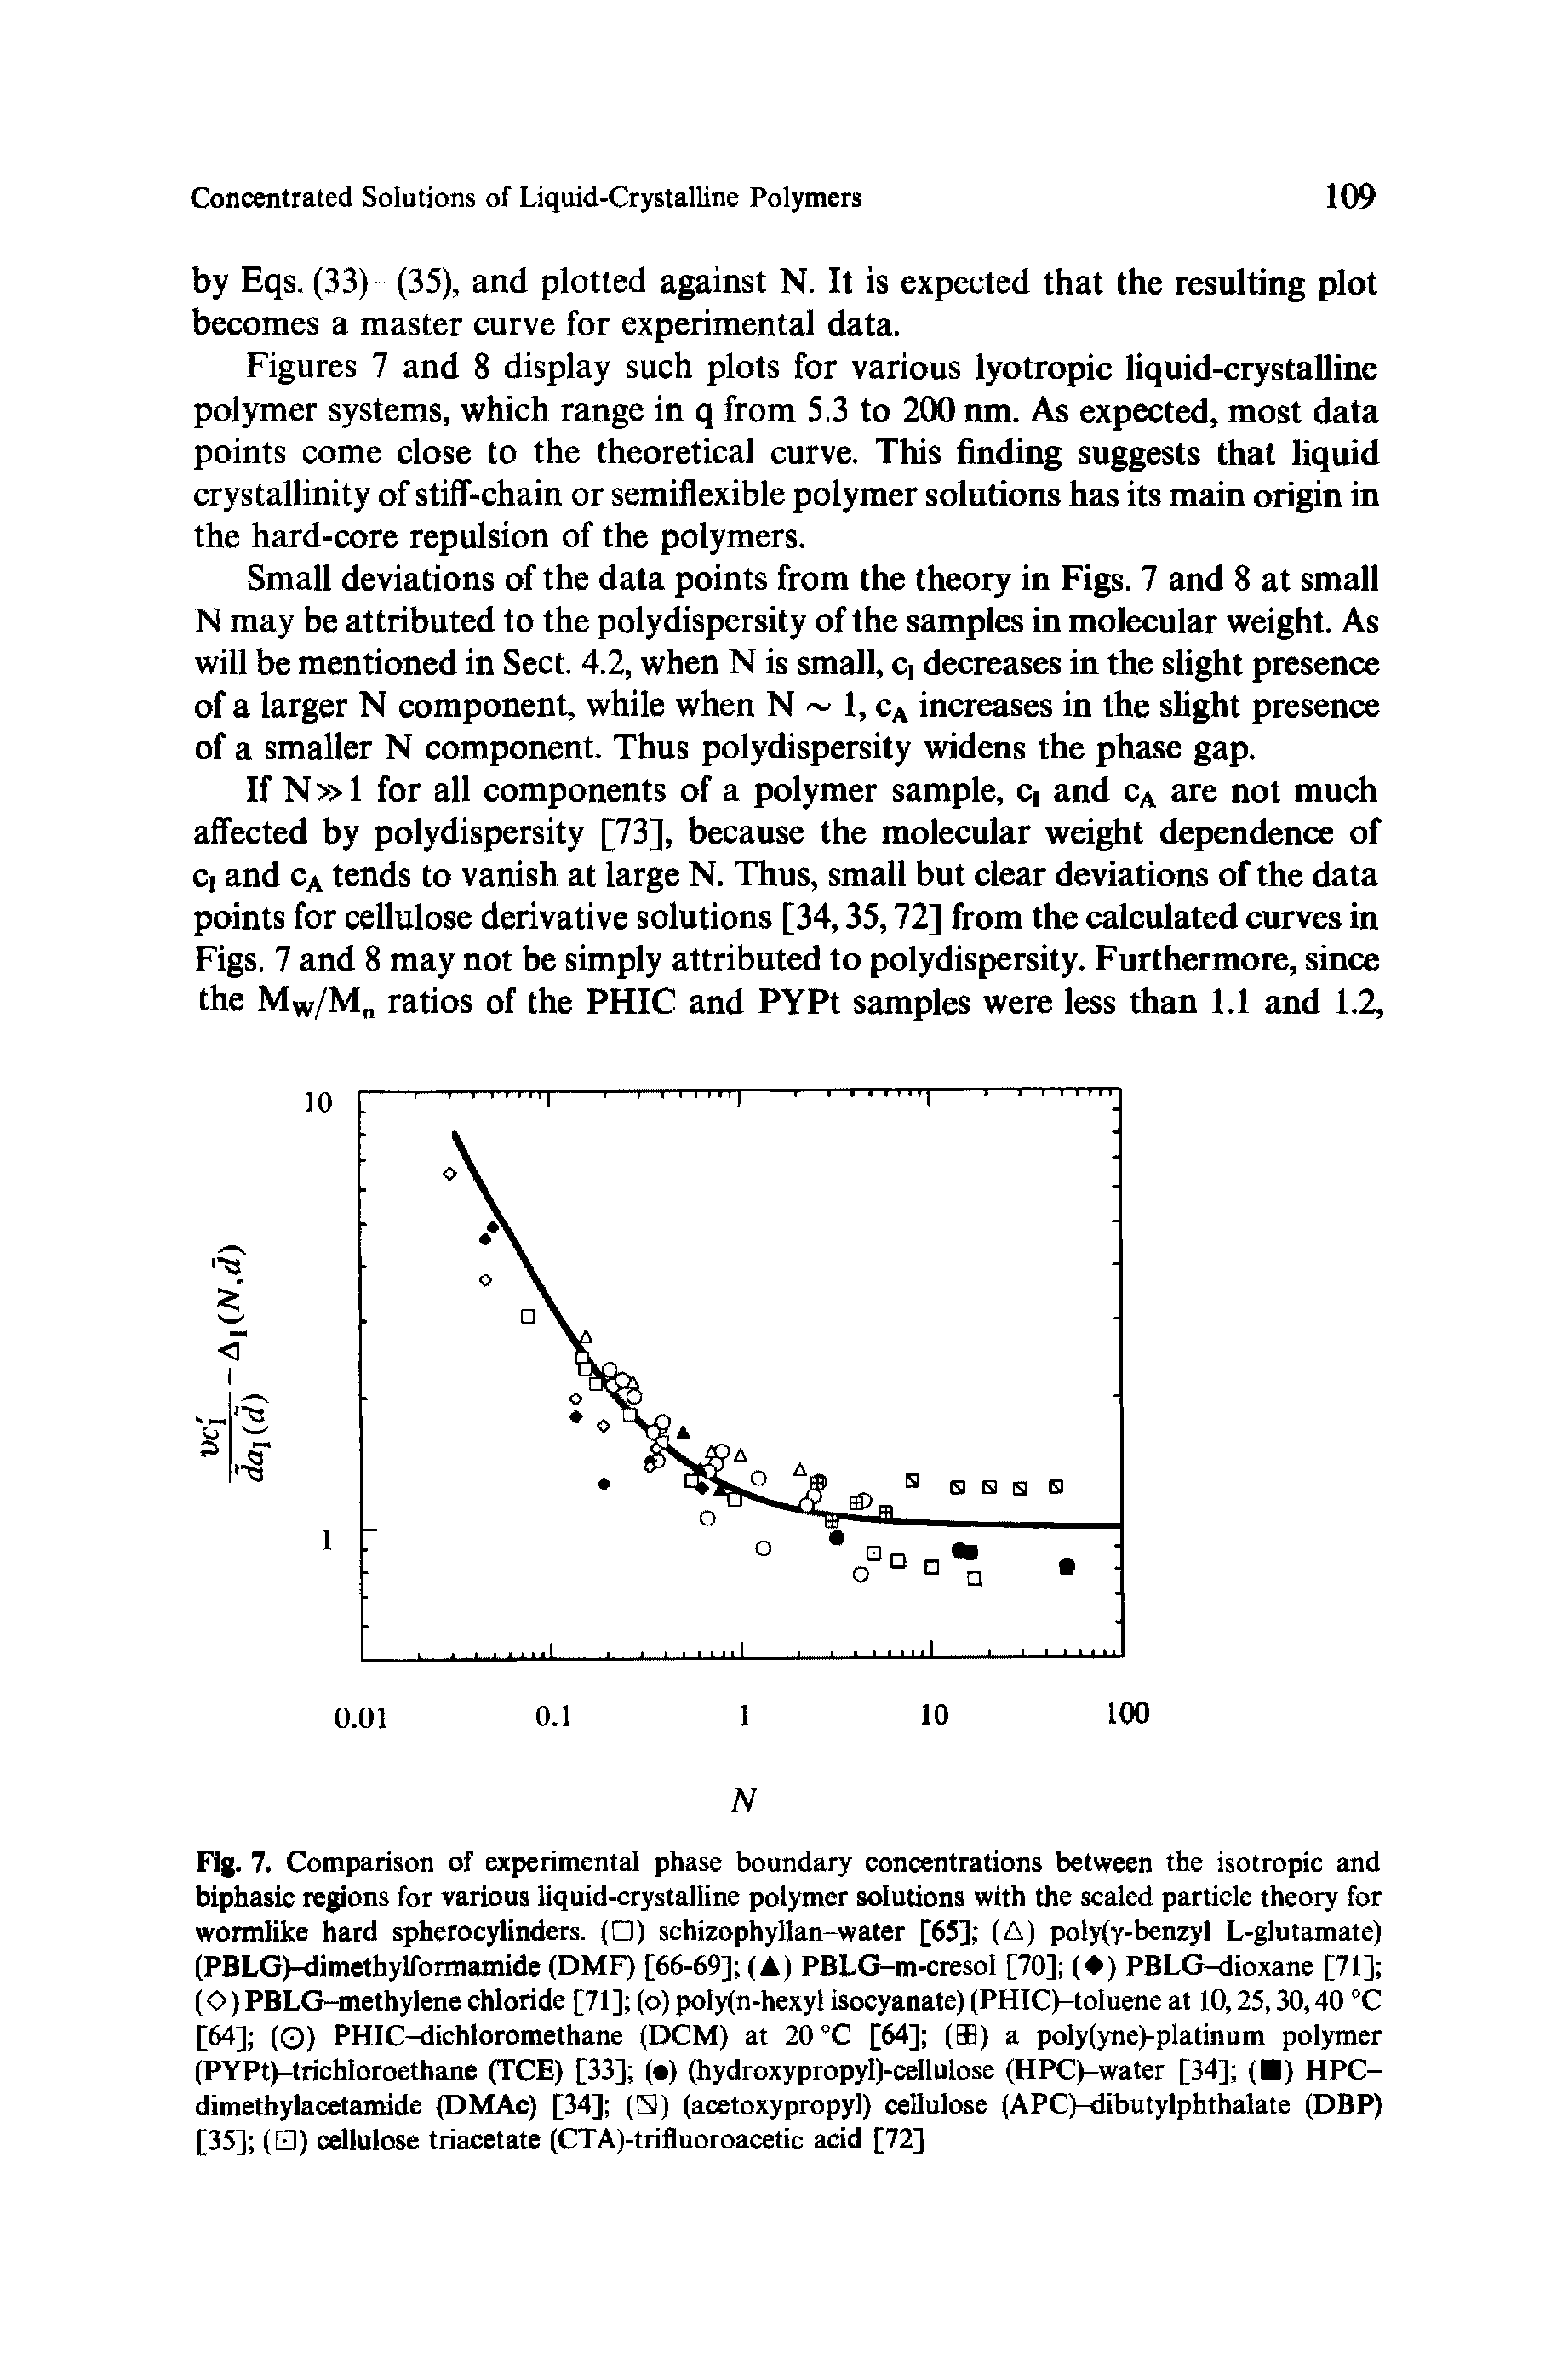 Fig. 7. Comparison of experimental phase boundary concentrations between the isotropic and biphasic regions for various liquid-crystalline polymer solutions with the scaled particle theory for wormlike hard spherocylinders. ( ) schizophyllan water [65] (A) poly y-benzyl L-glutamate) (PBLG)-dimethylformamide (DMF) [66-69] (A) PBLG-m-cresoI [70] ( ) PBLG-dioxane [71] (O) PBLG-methylene chloride [71] (o) po y(n-hexyl isocyanate) (PHICH°Iuene at 10,25,30,40 °C [64] (O) PHIC-dichloromethane (DCM) at 20 °C [64] (5) a po y(yne)-platinum polymer (PYPt)-tuchIoroethane (TCE) [33] ( ) (hydroxypropyl)-cellulose (HPC)-water [34] ( ) HPC-dimethylacetamide (DMAc) [34] (N) (acetoxypropyl) cellulose (APC)-dibutylphthalate (DBP) [35] ( ) cellulose triacetate (CTA)-trifluoroacetic acid [72]...